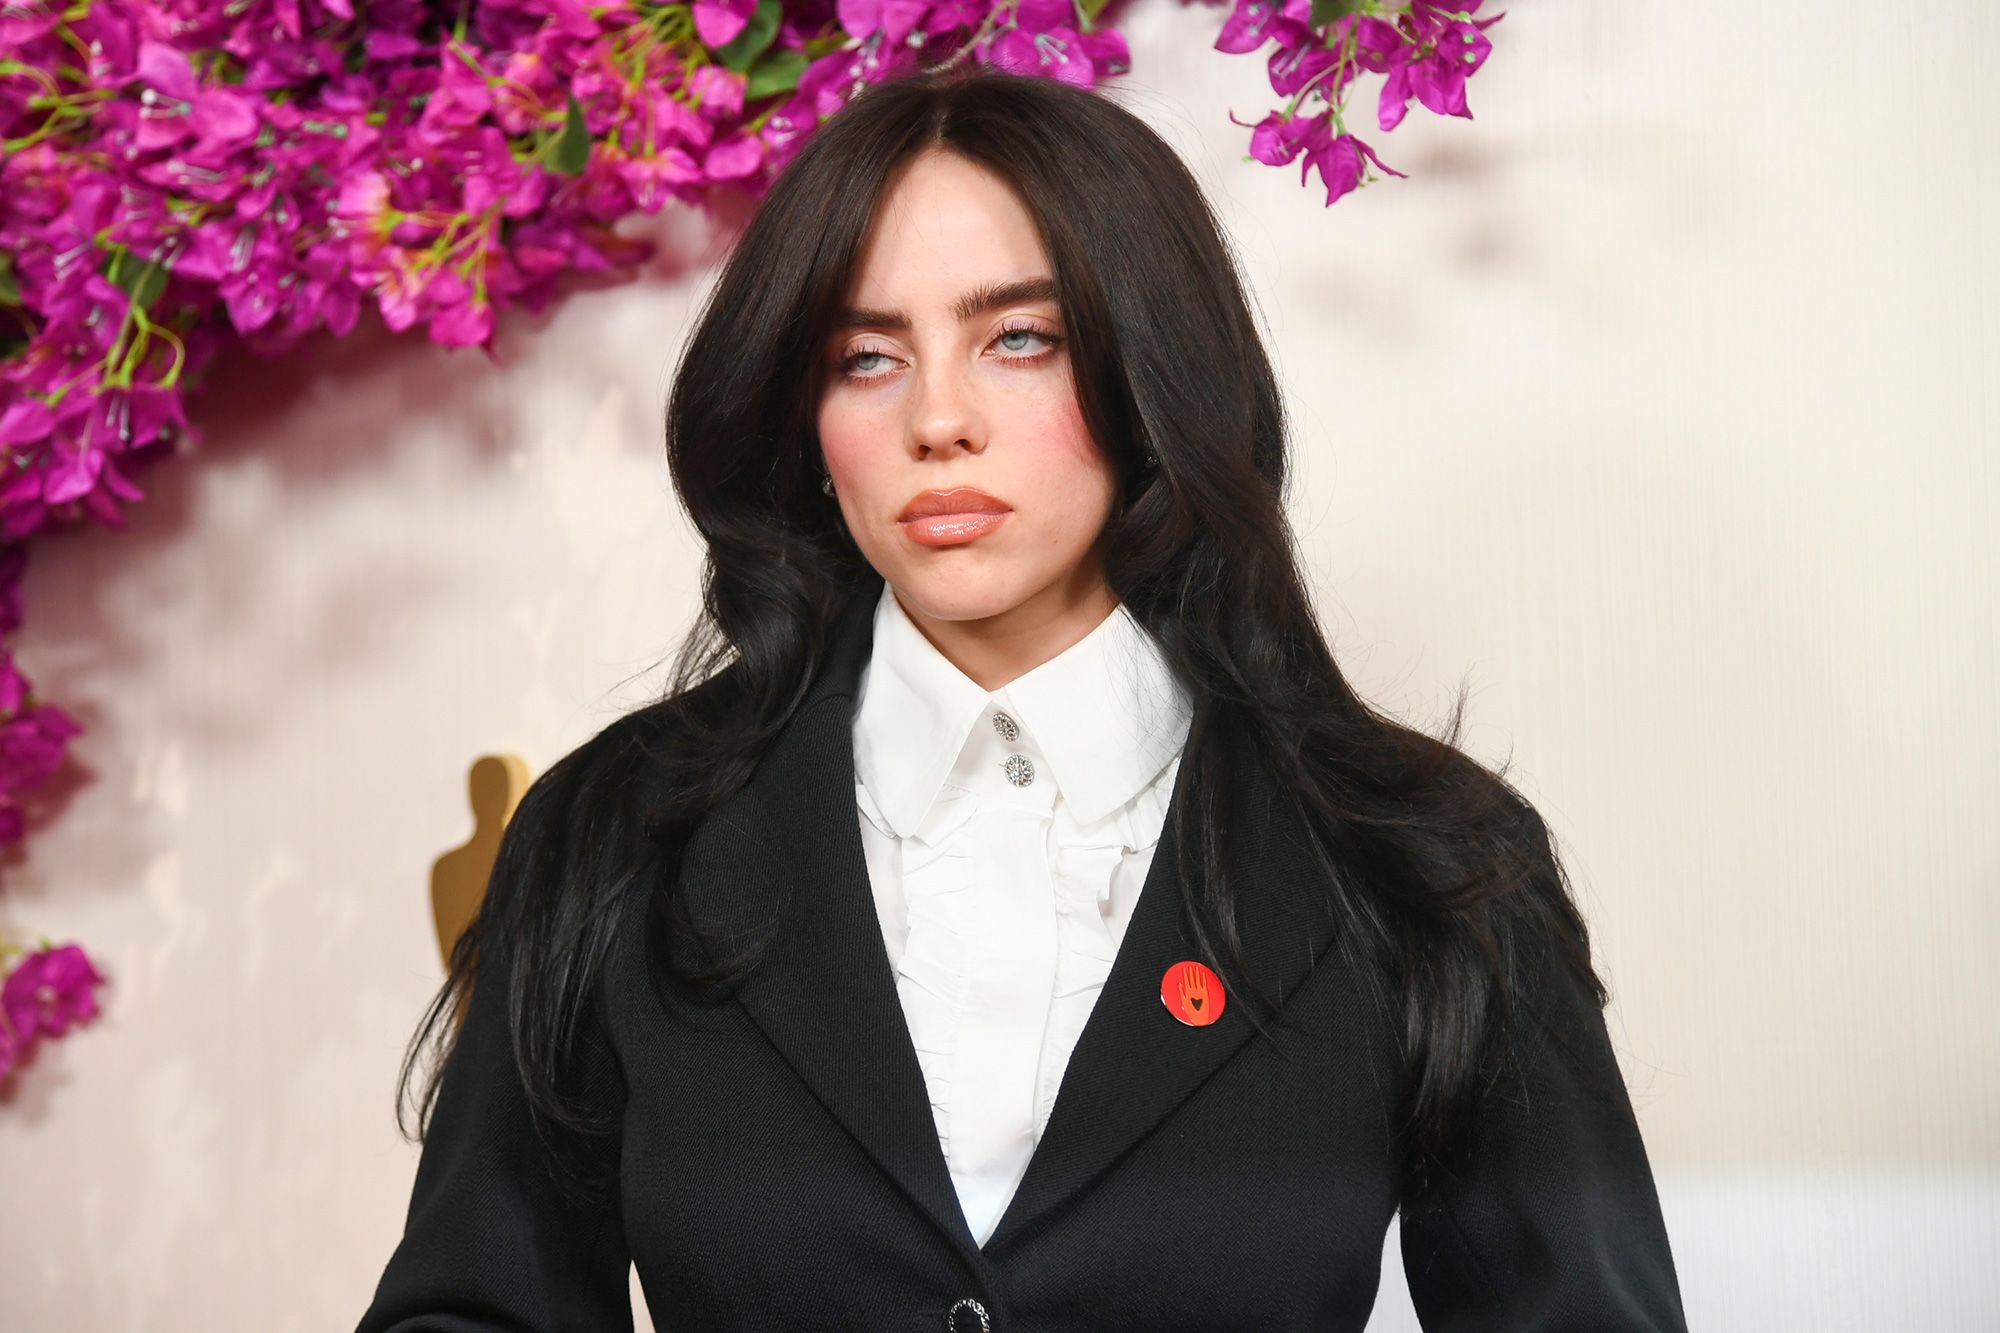 Billie Eilish at the 96th Academy Awards. Eilish wore a pin with a Chanel blazer calling for a ceasefire in Palestine.